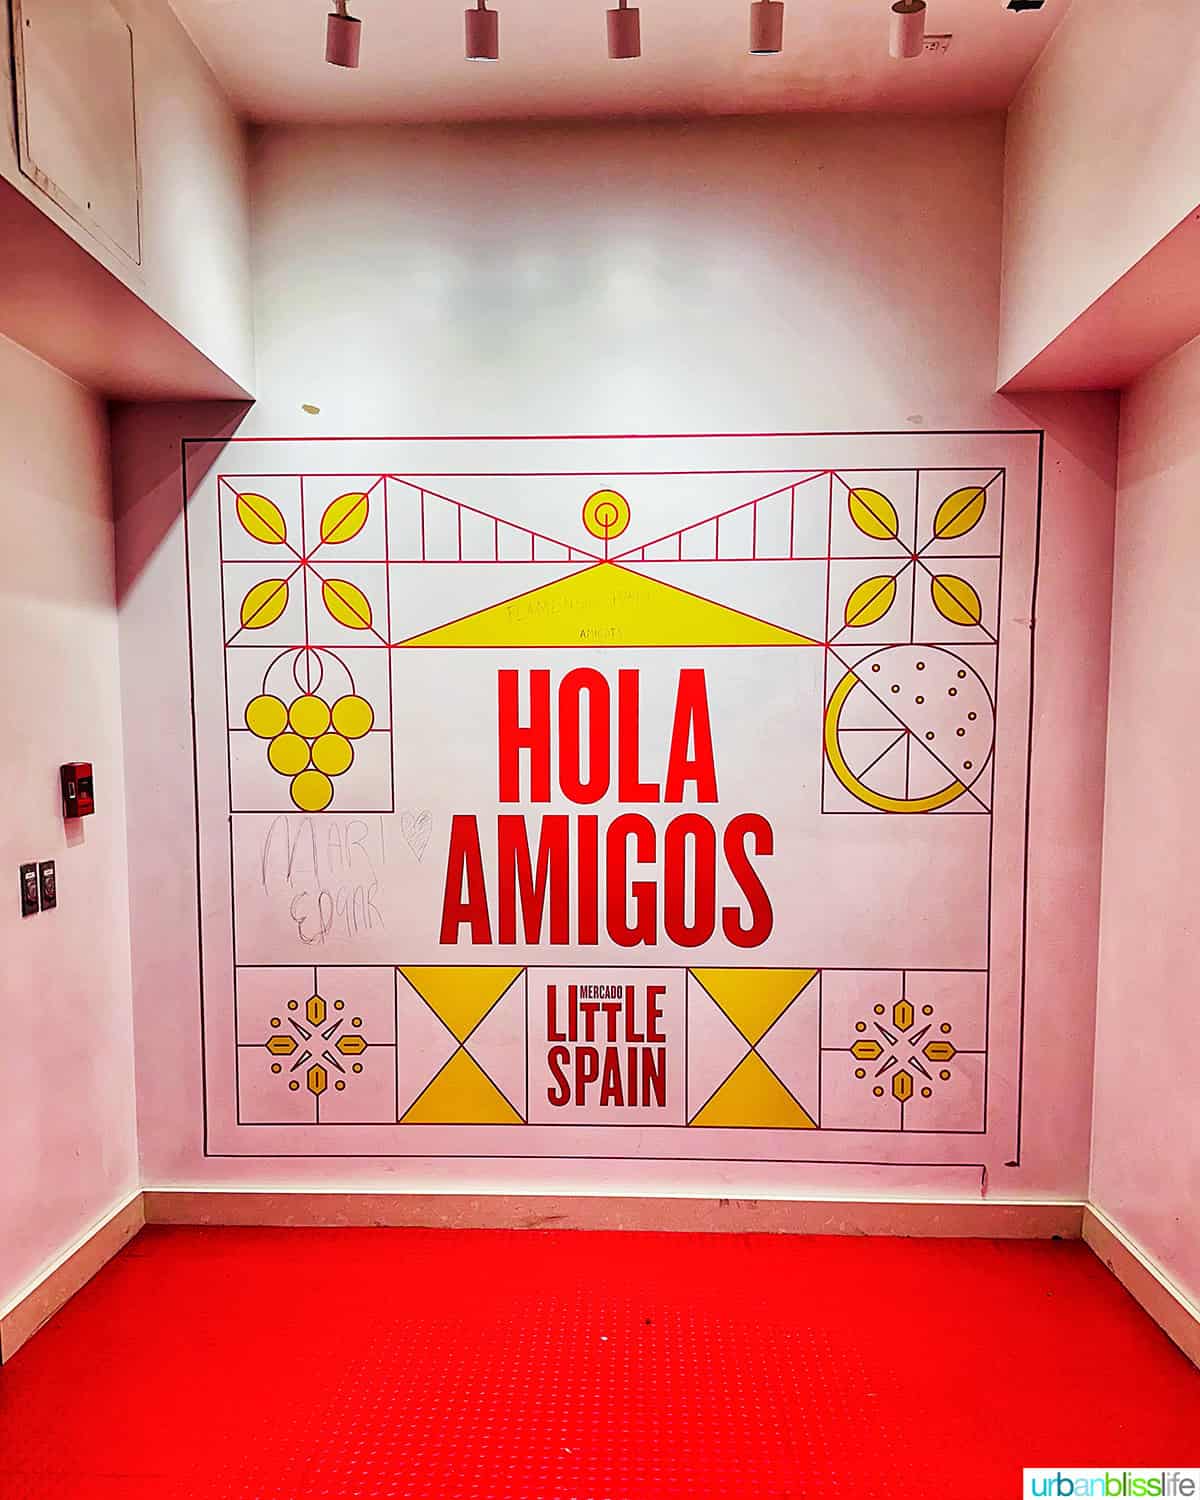 Hola Amigos mural at Mercado Little Spain in NYC.